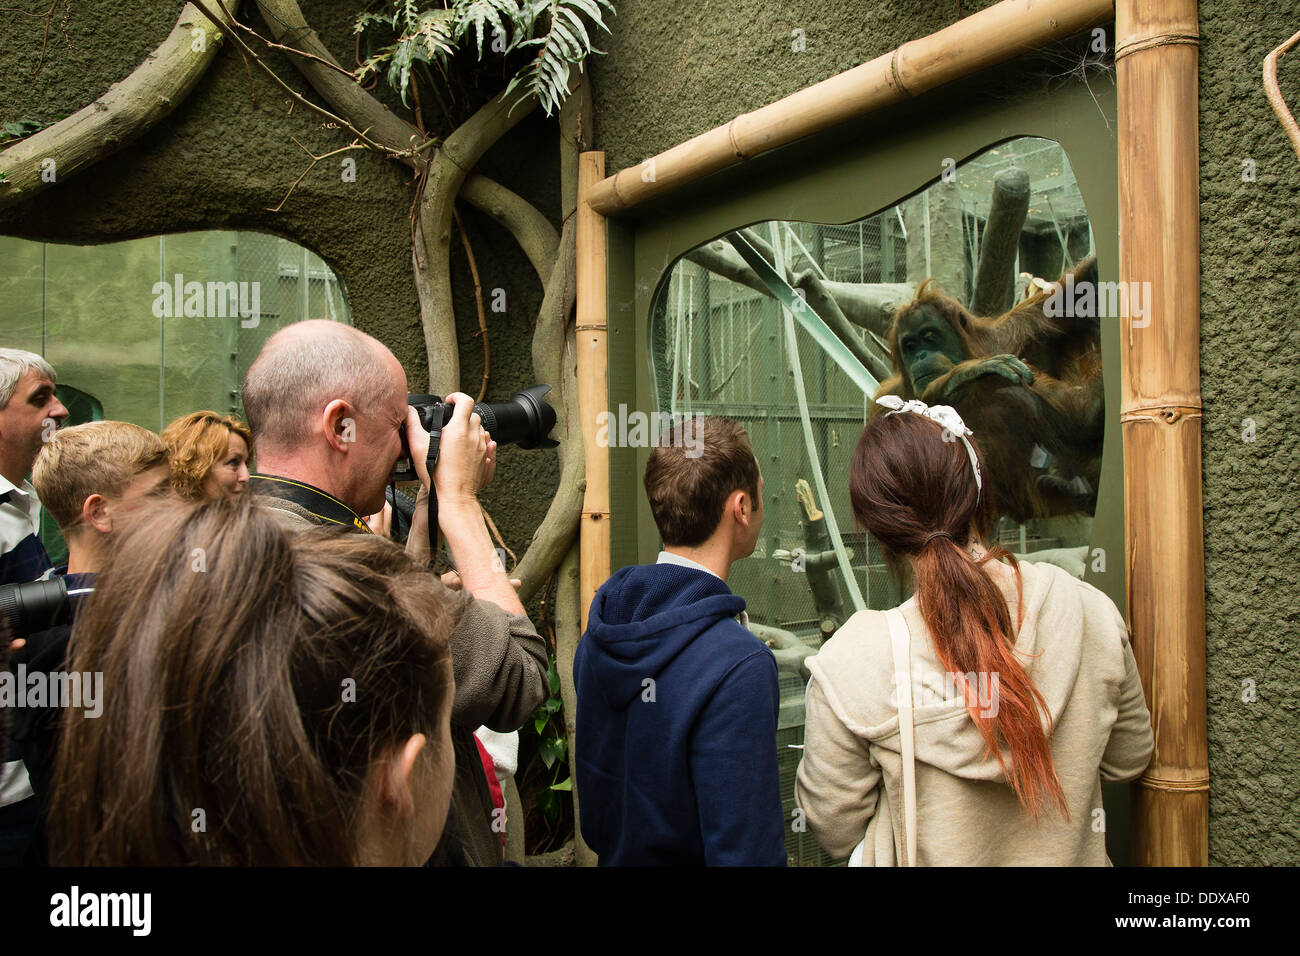 People watching and photographing an orangutan in its enclosure at Chester Zoo Stock Photo